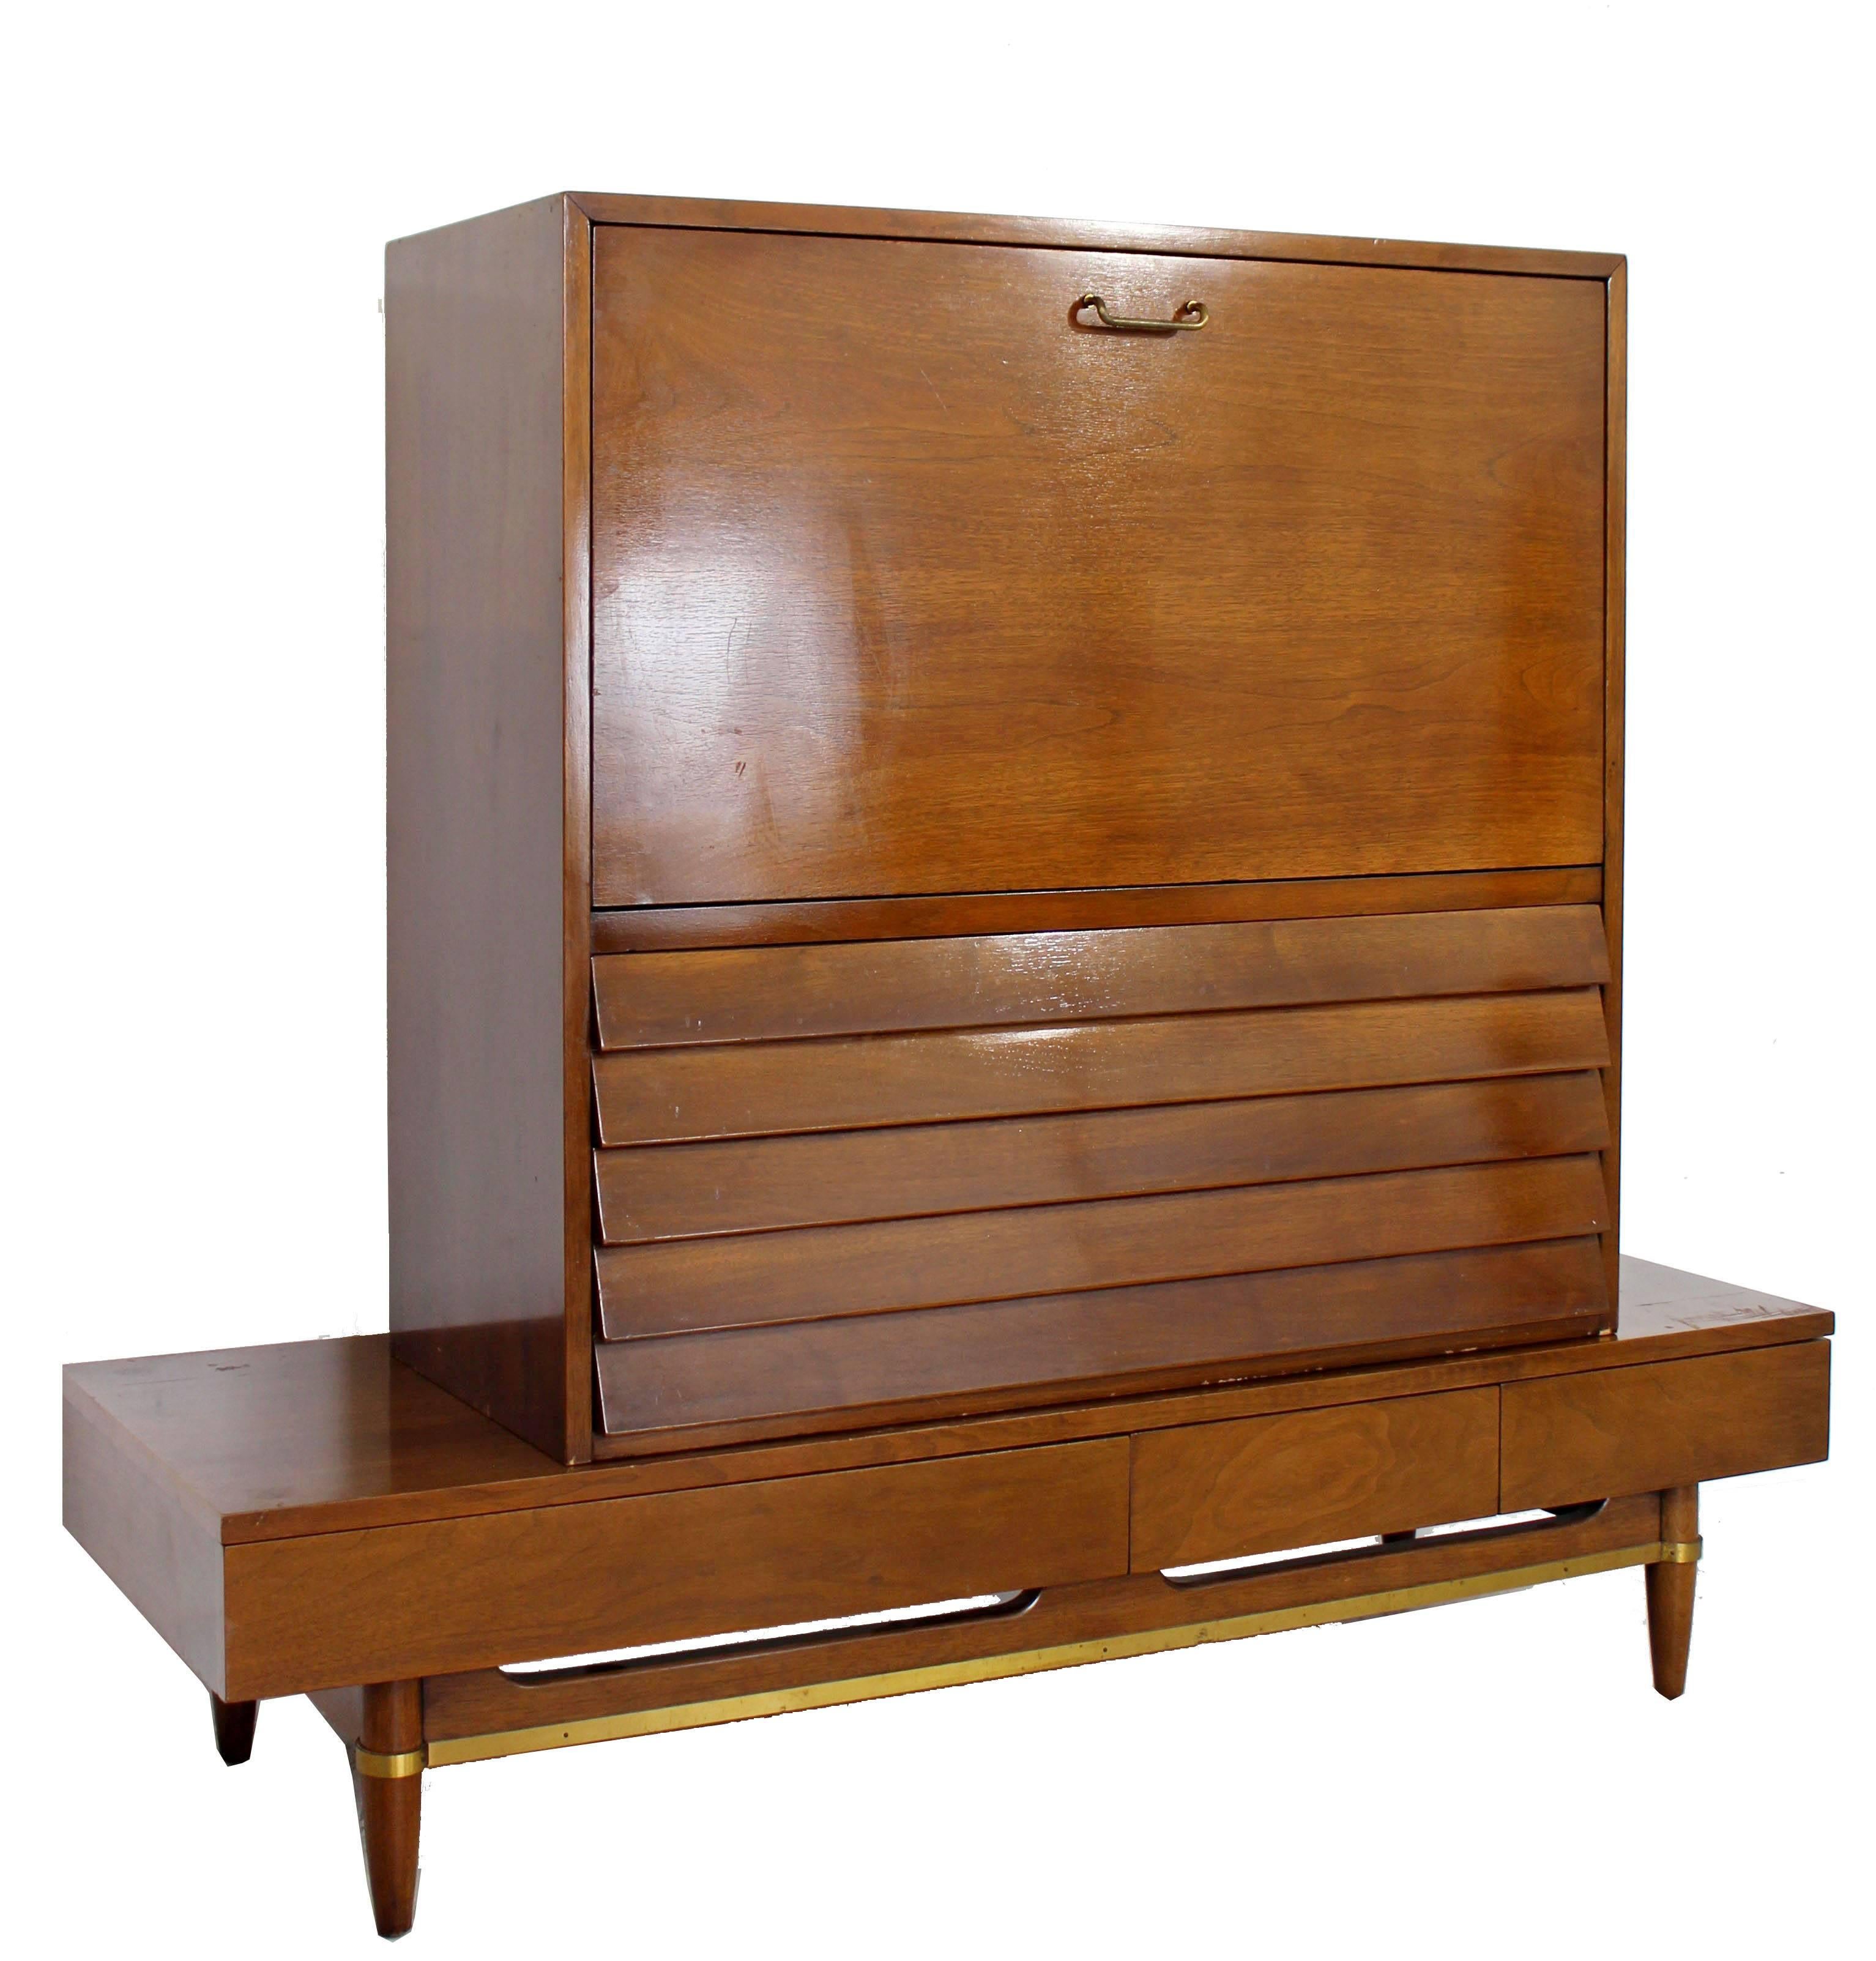 For your consideration is a stunning, walnut, bedroom set that was designed by Merton Gershun for American of Martinsville, the Dania collection, circa the 1970s. The set includes a secretary, one nightstand and one cabinet. All pieces have brass,